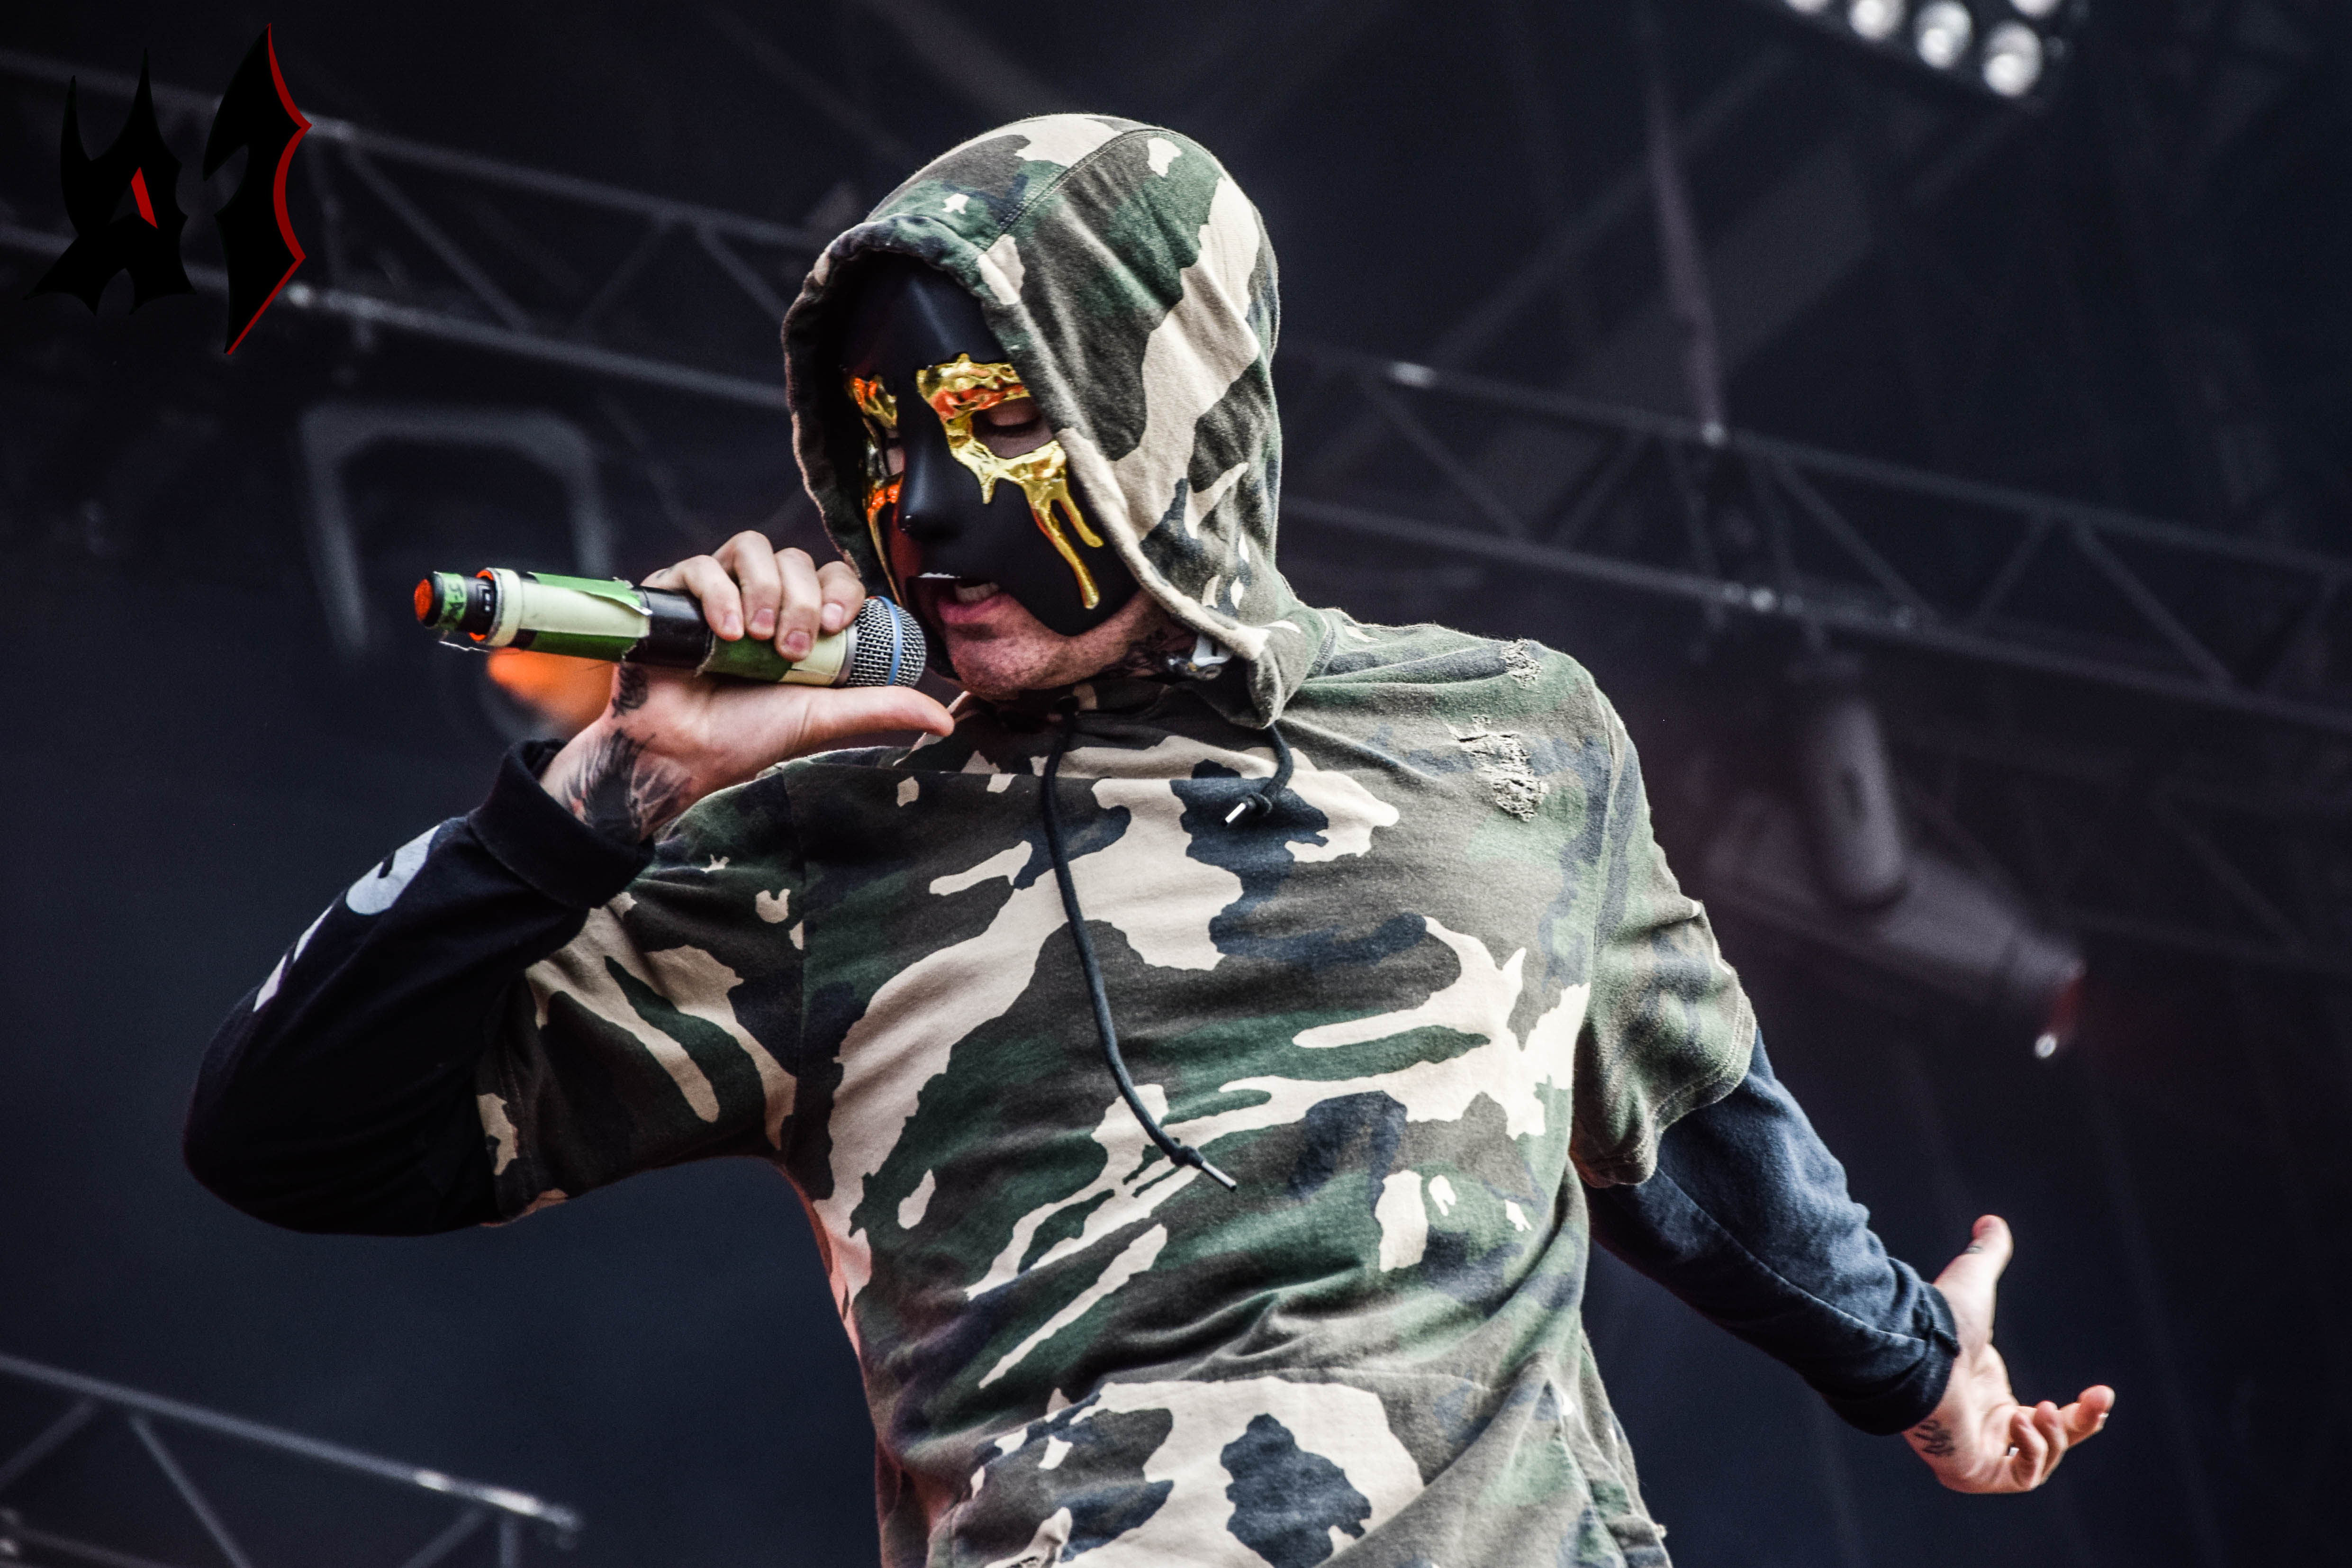 Donwload 2018 – Day 2 - Hollywood Undead 15